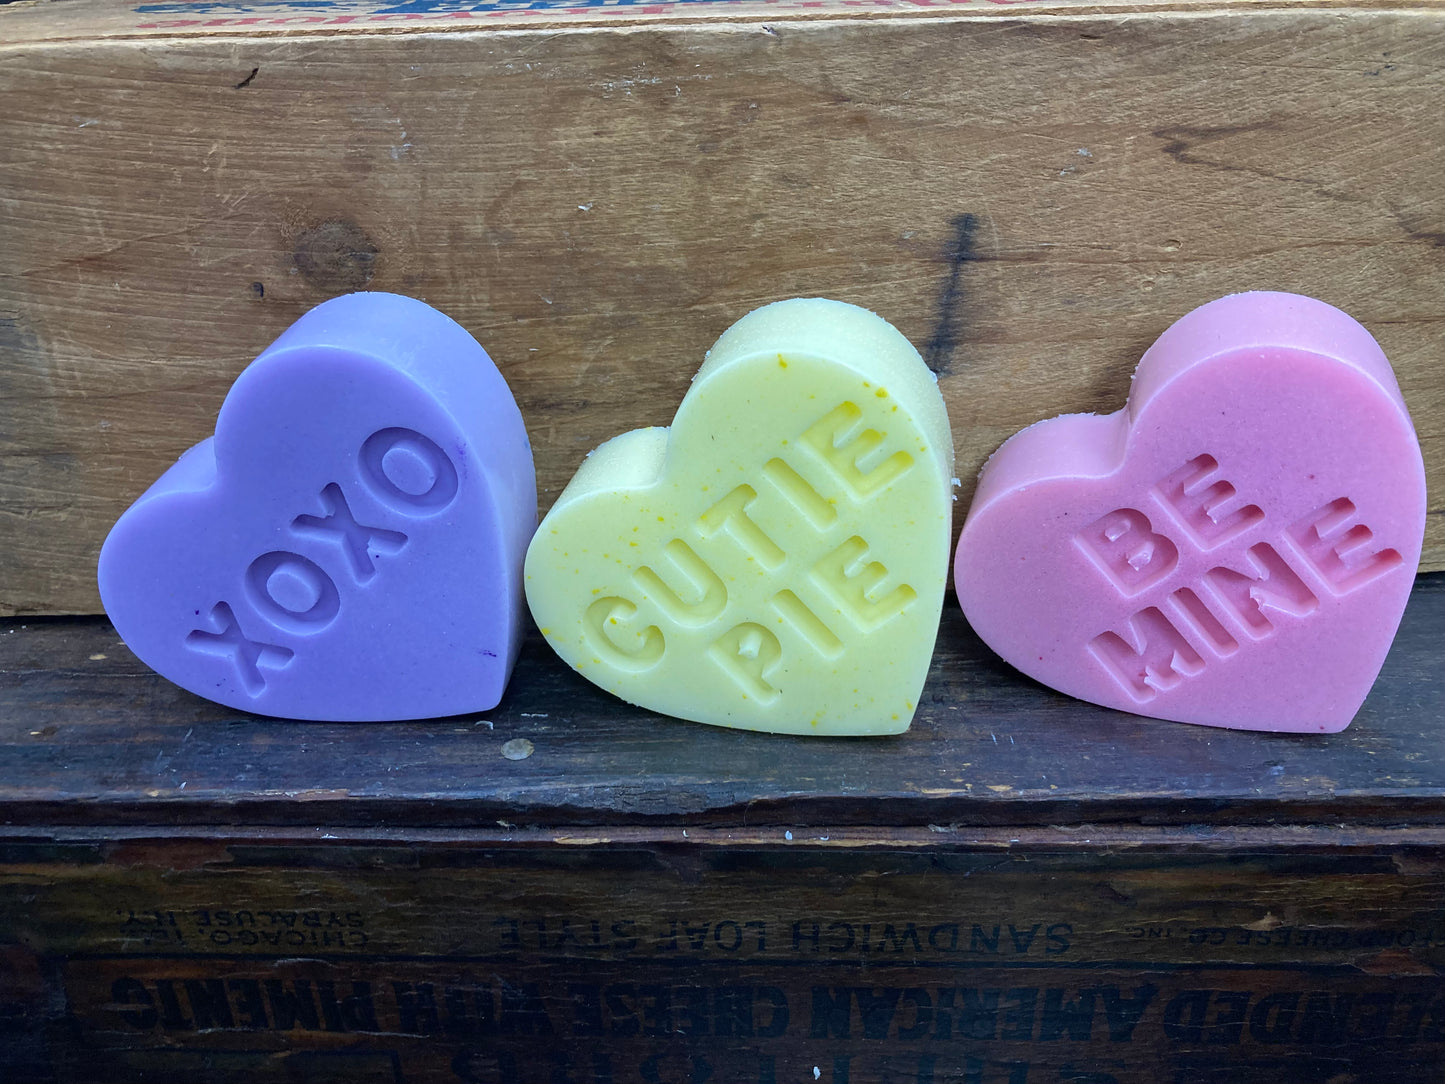 Valentine's Day is coming!    This adorable 4 oz Conversation Heart-shaped Goats Milk soaps are $5 each.    The scent is Candy Crush.   The colors of the hearts may vary from the photo!     These make an adorable Valentine's Day gift that is calorie-free!